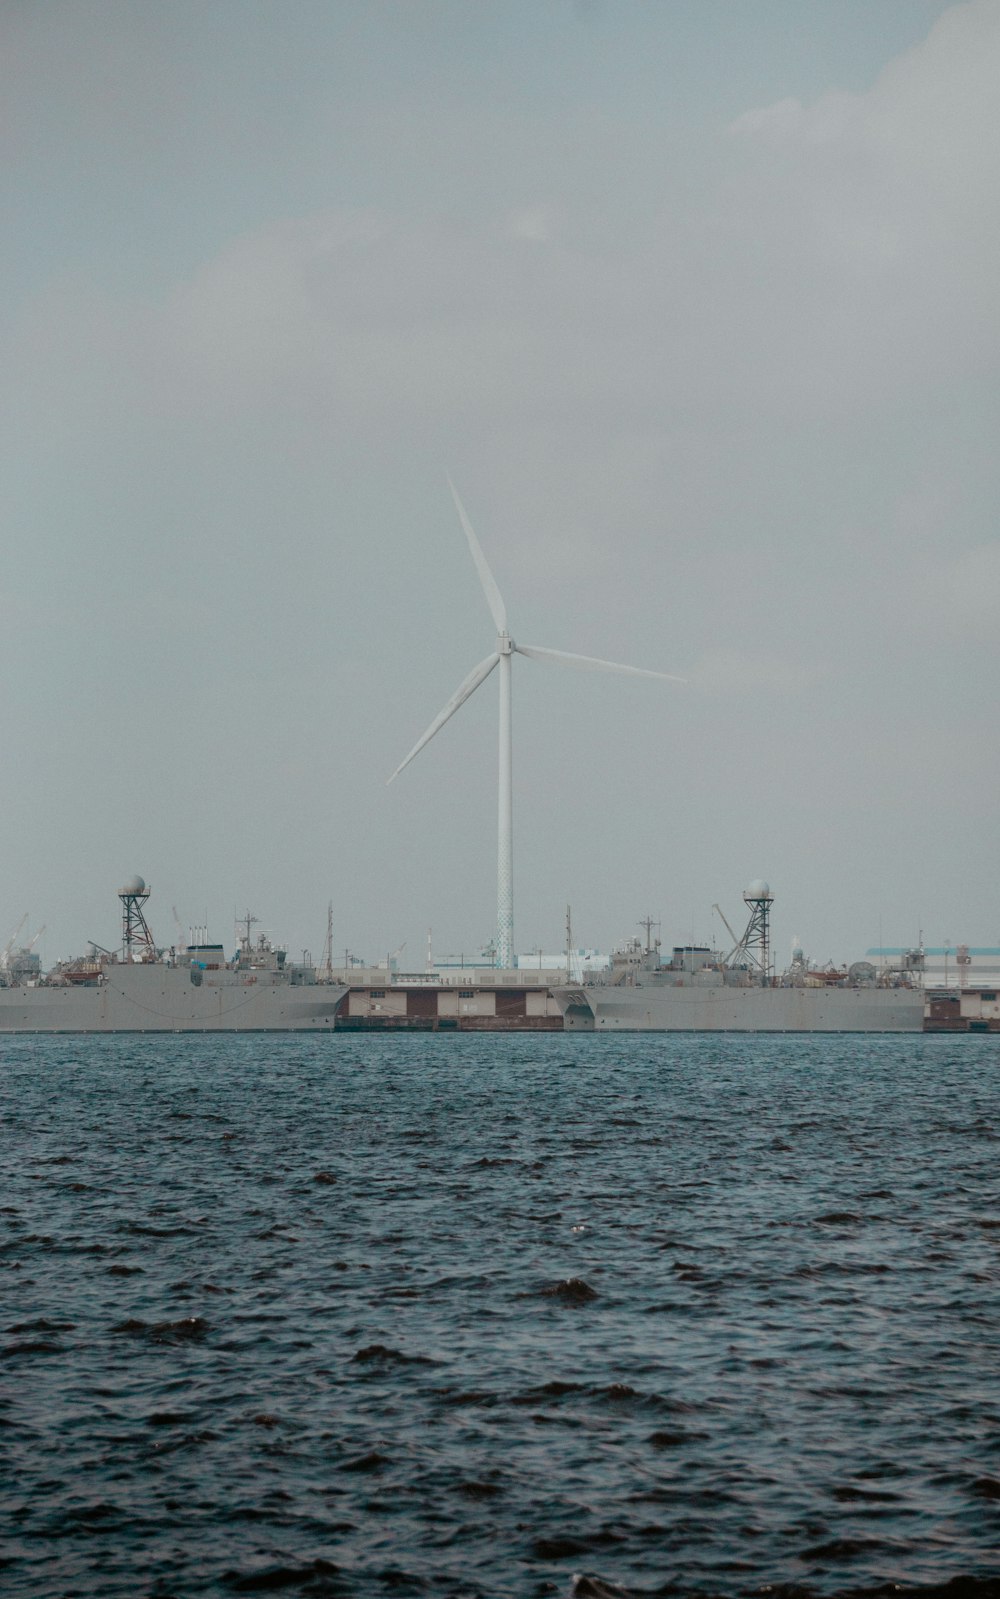 a large ship in the water with a wind turbine in the background